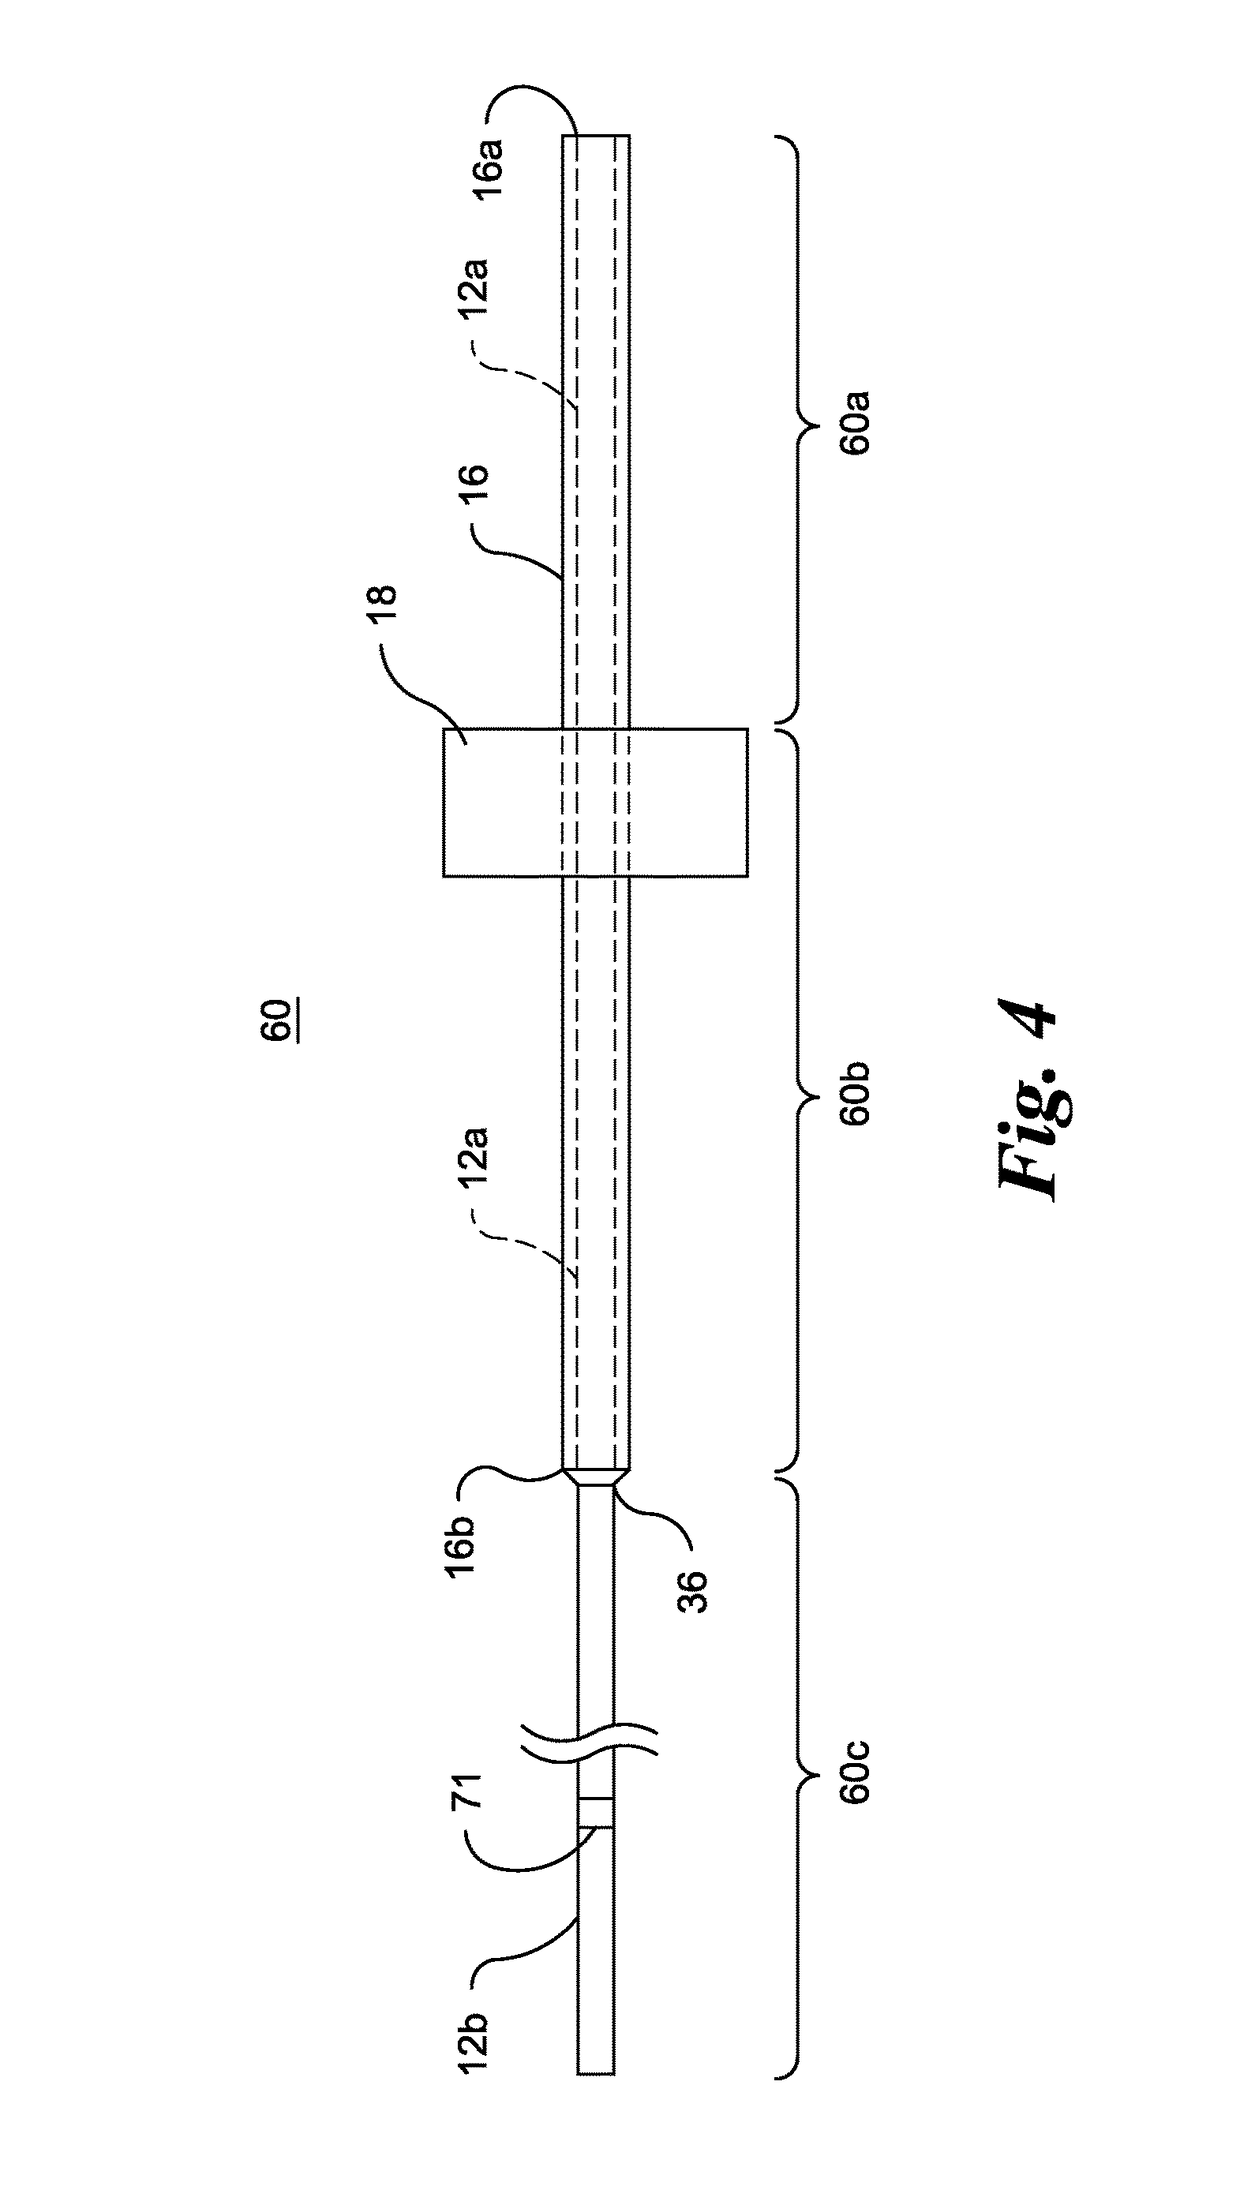 Apparatus and method for separating and storing human reproductive material in a cryotank